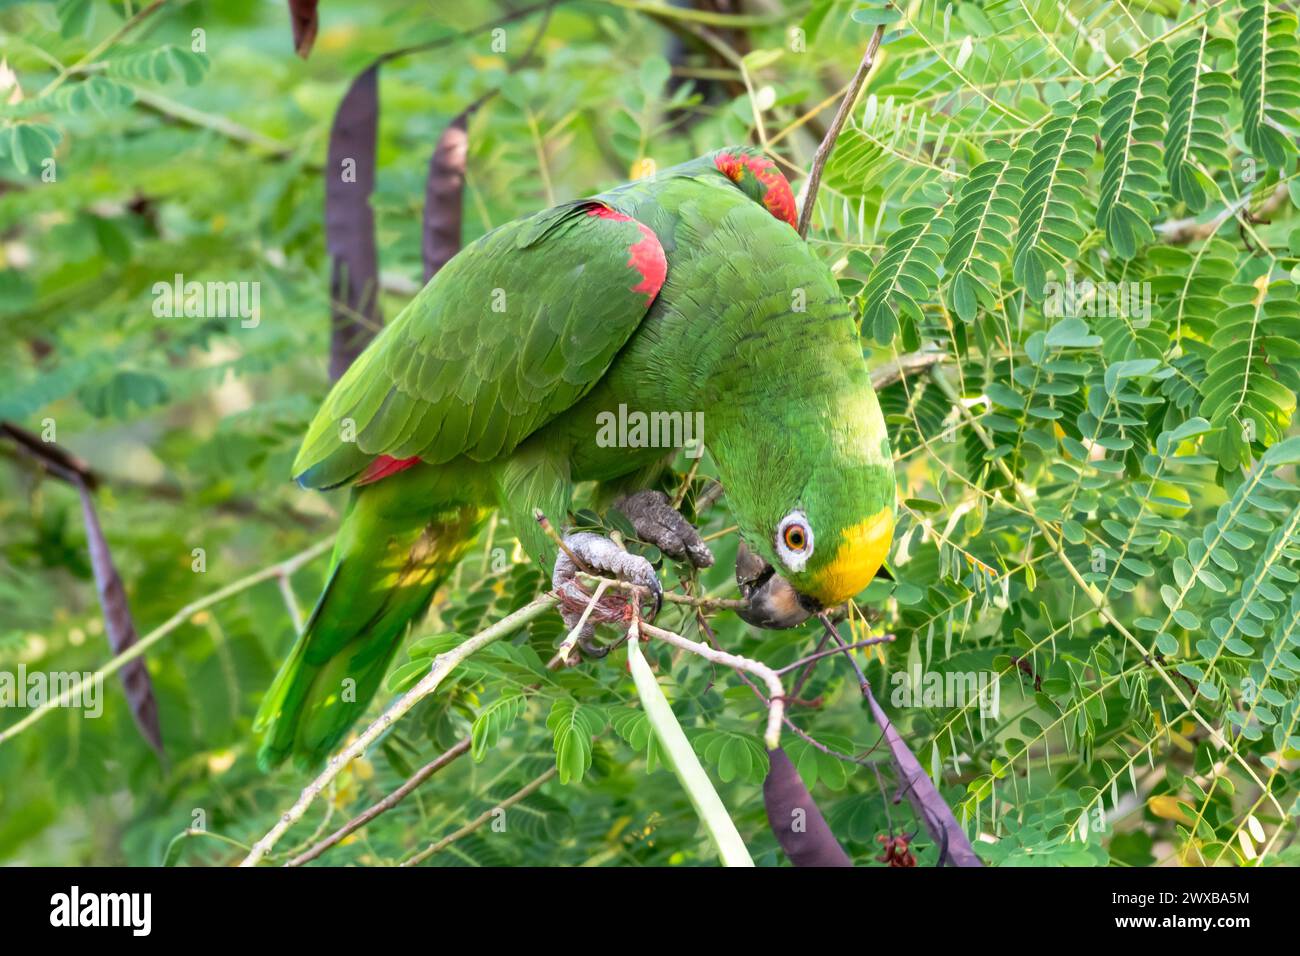 Yellow-crowned Parrot, Amazona ochrocephala, feeding on seeds in a Pride of Barbados tree in the rainforest of Trinidad and Tobago Stock Photo